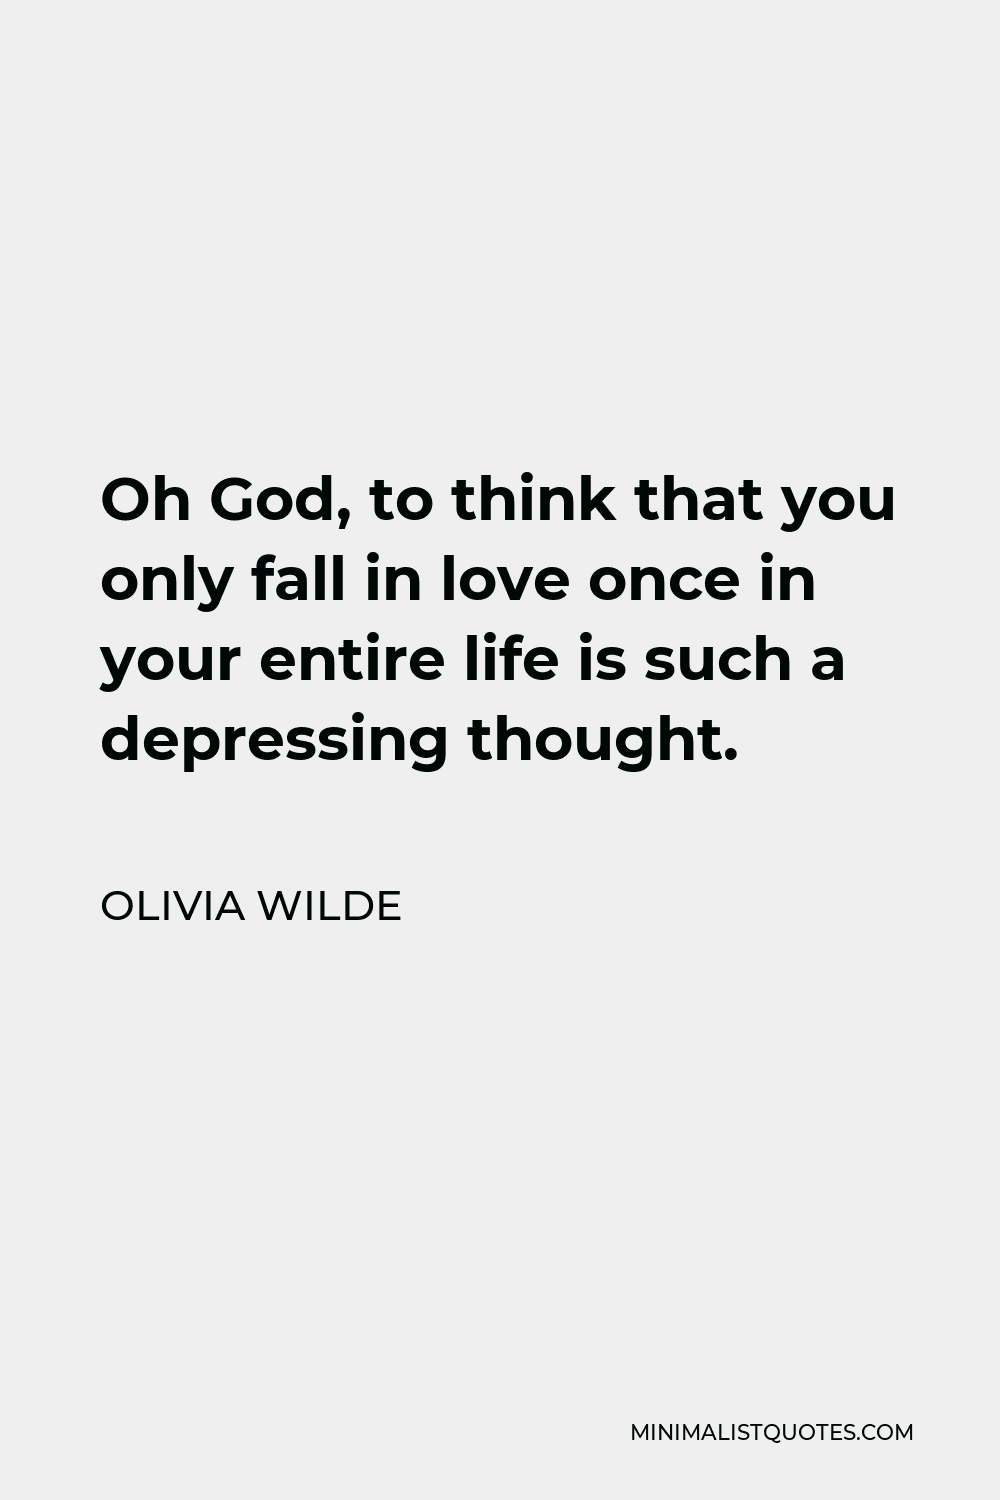 Olivia Wilde Quote - Oh God, to think that you only fall in love once in your entire life is such a depressing thought.